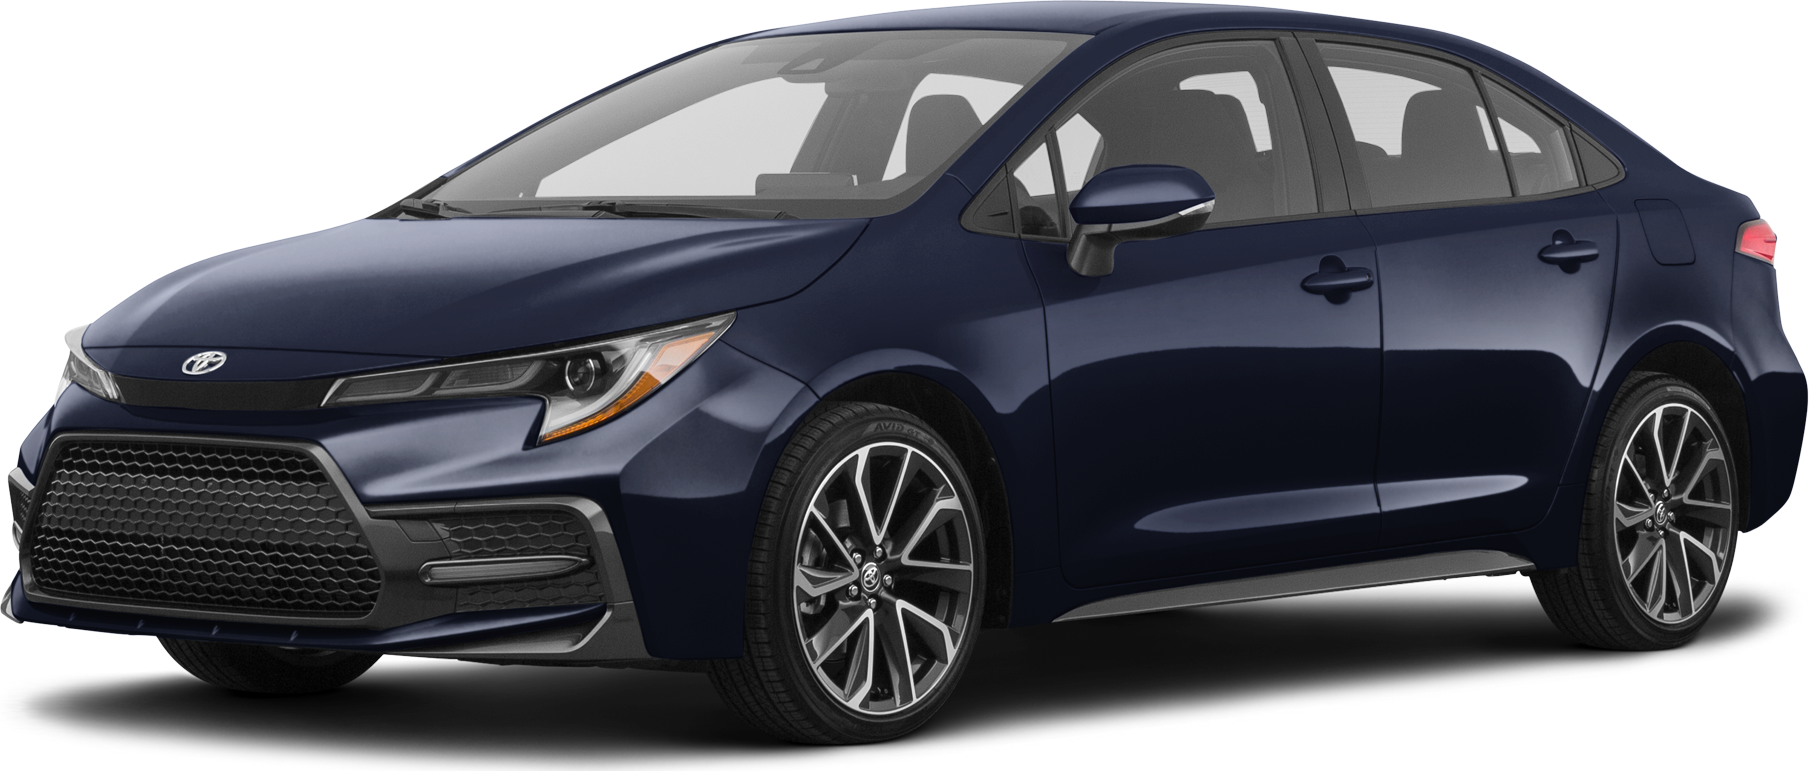 2020 Toyota Corolla Price, Value, Ratings & Reviews